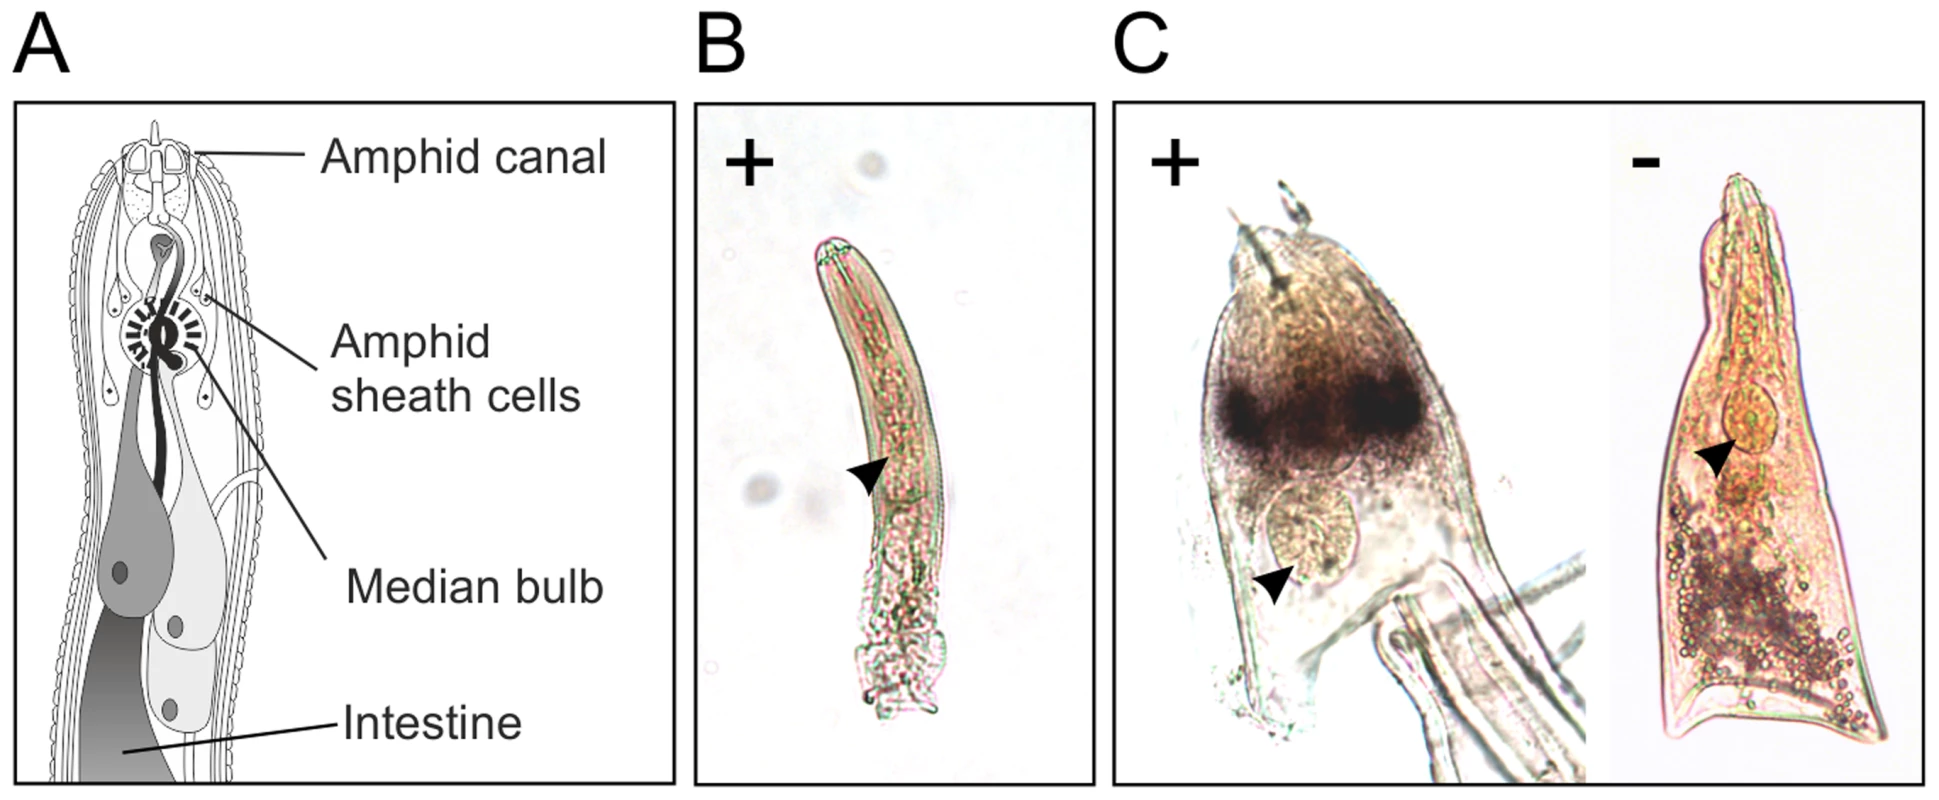 HYP effectors are expressed in the amphid sheath cells of parasitic females.